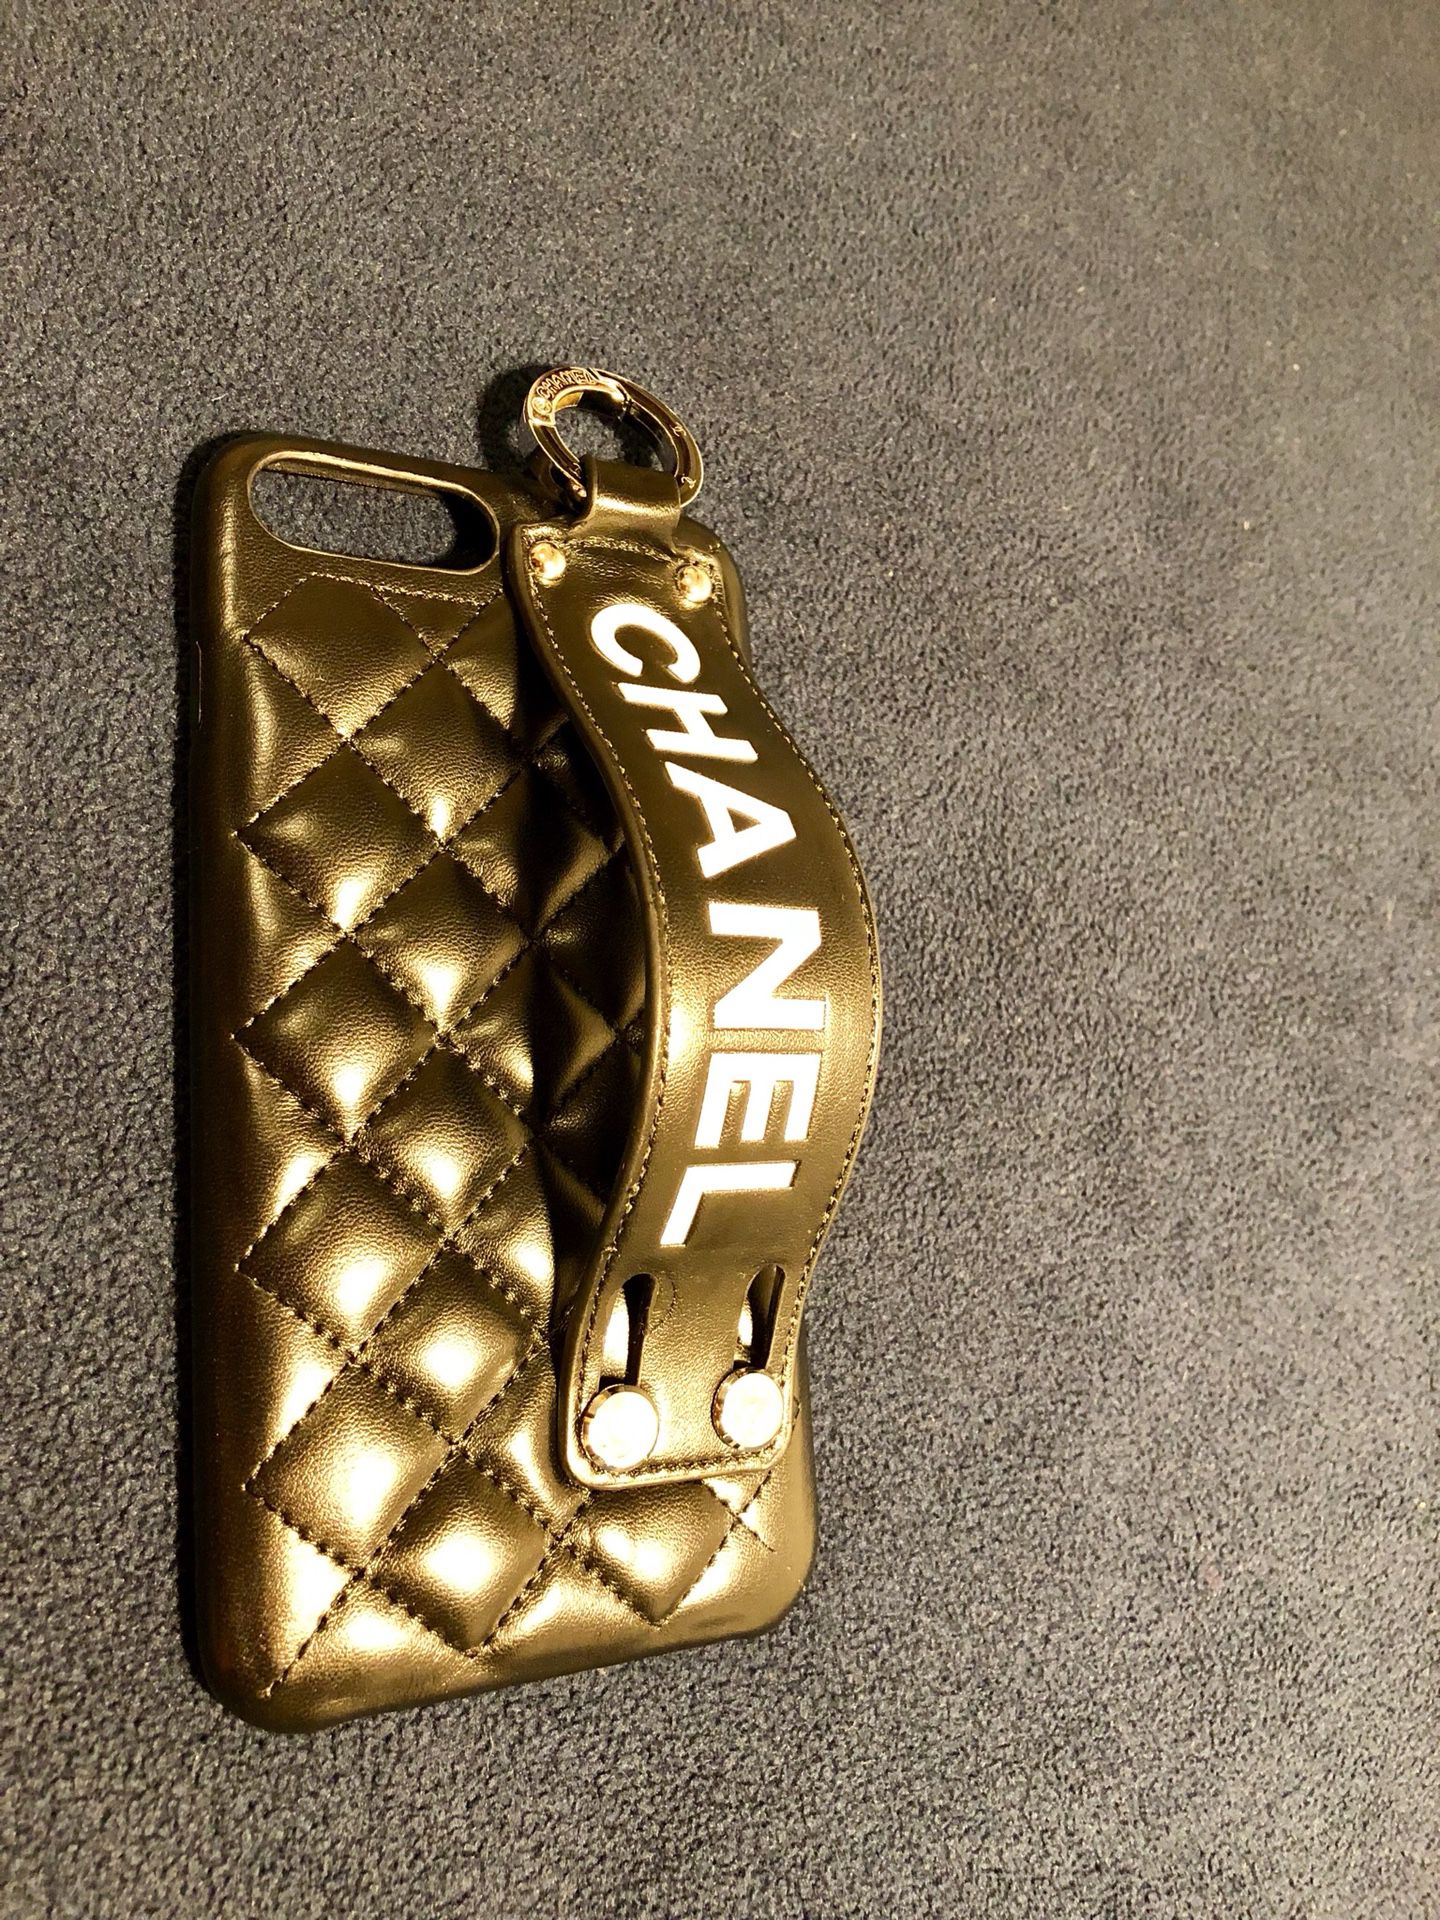 Chanel phone case iPhone 7/8 Plus for Sale in Wildomar, CA - OfferUp